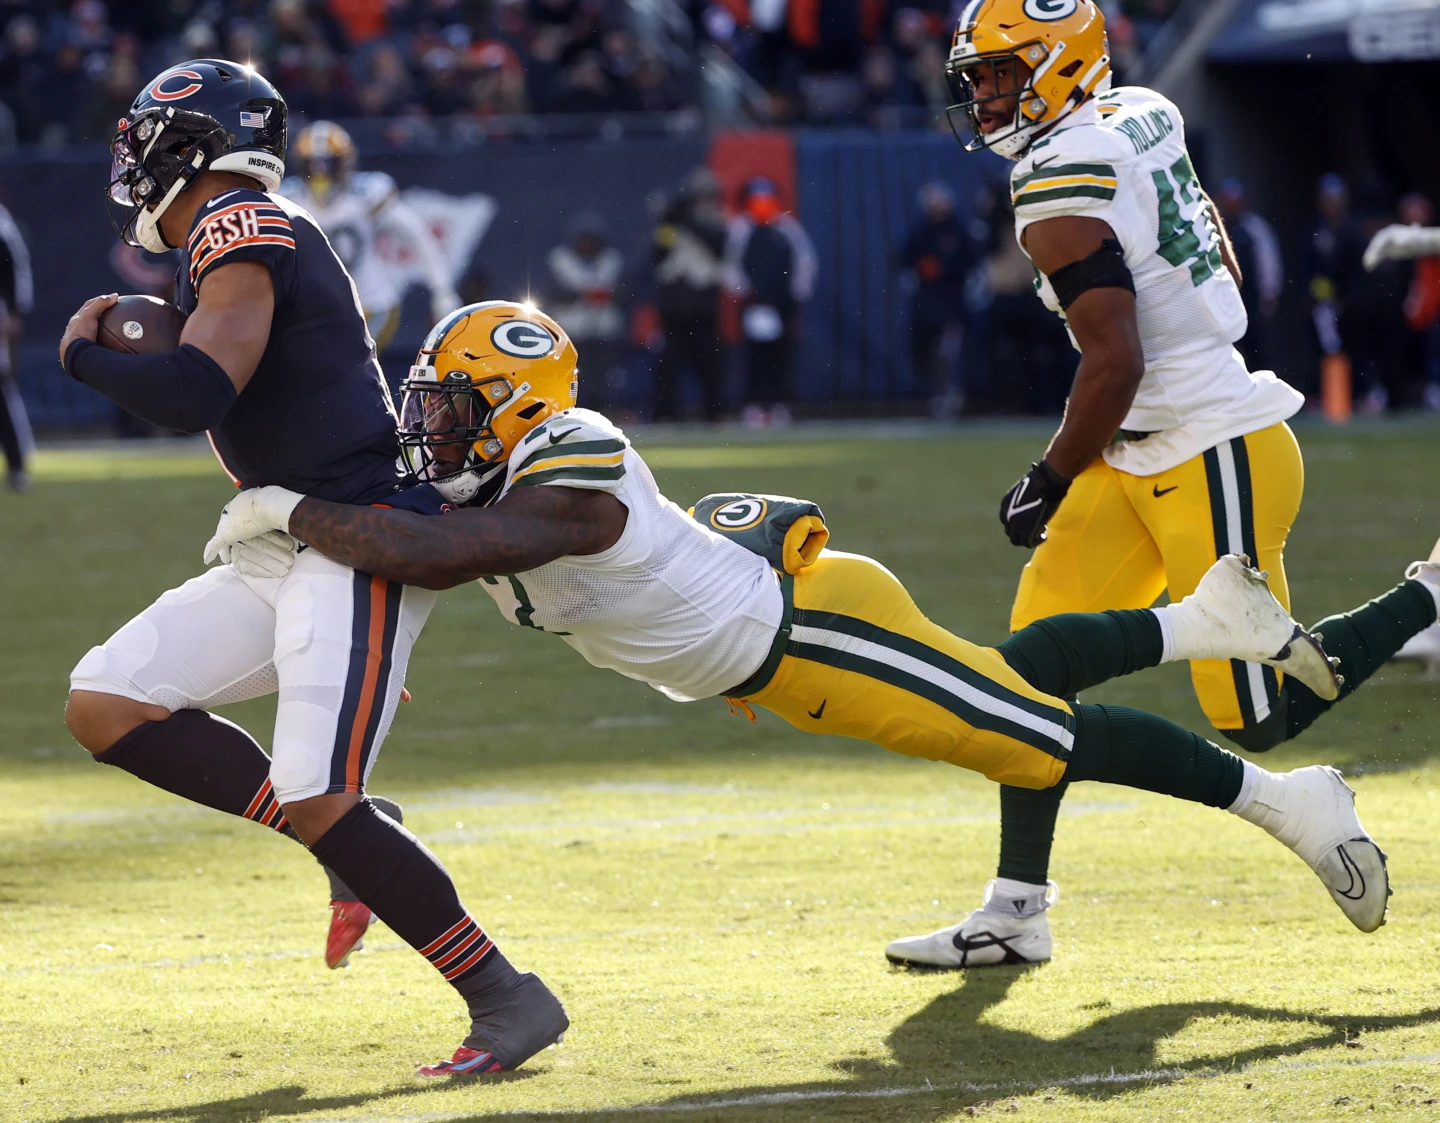 Packers can earn spot in playoffs if they continue their recent domination of Bears